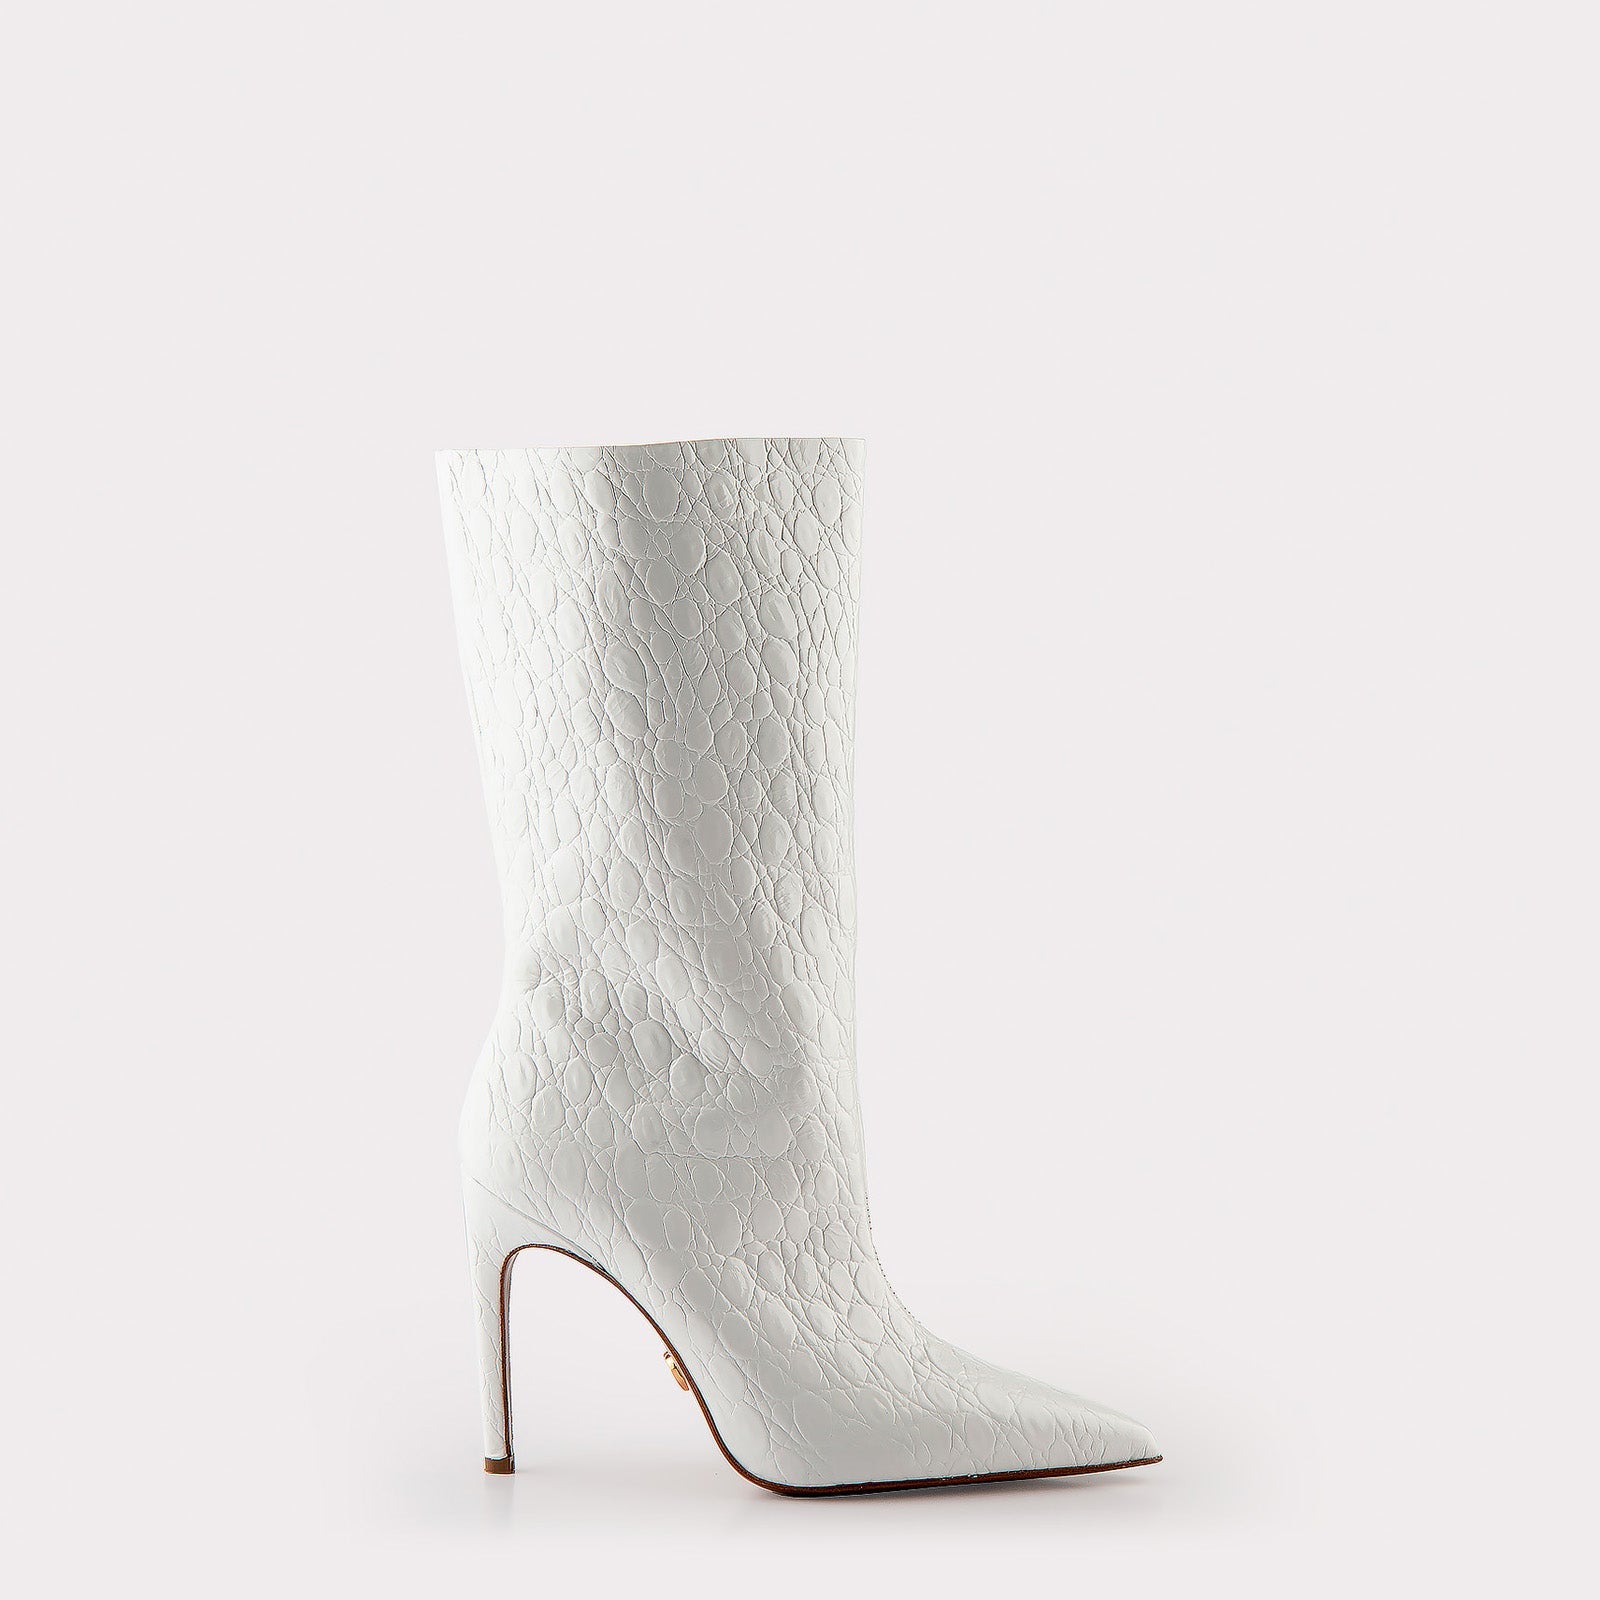 ANNIE 01 WHITE CROCO EMBOSSED LEATHER BOOTS